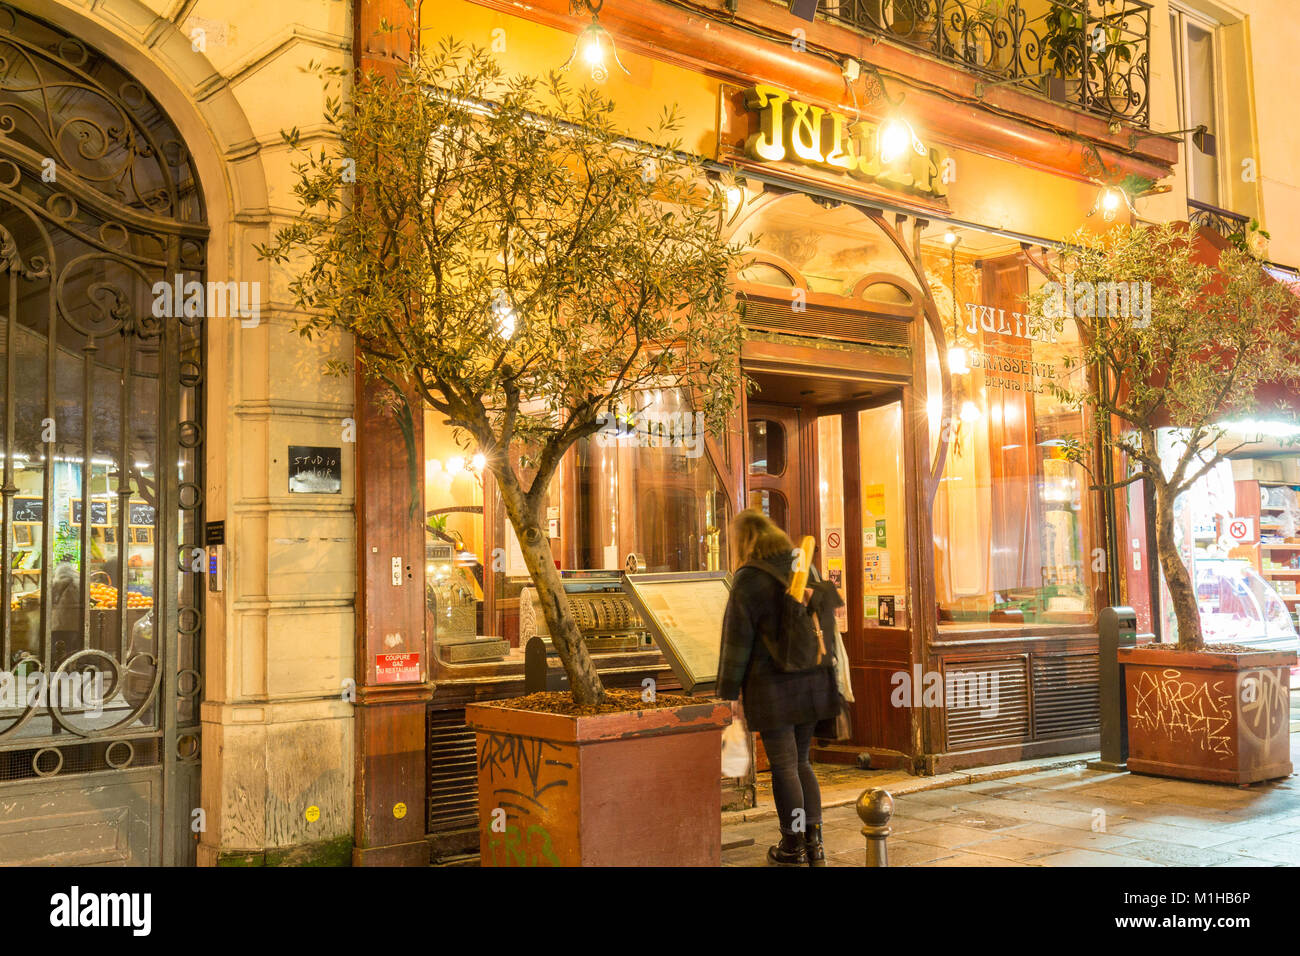 Brasserie Julien is historical monument of Paris .It was founded in 1903. Stock Photo